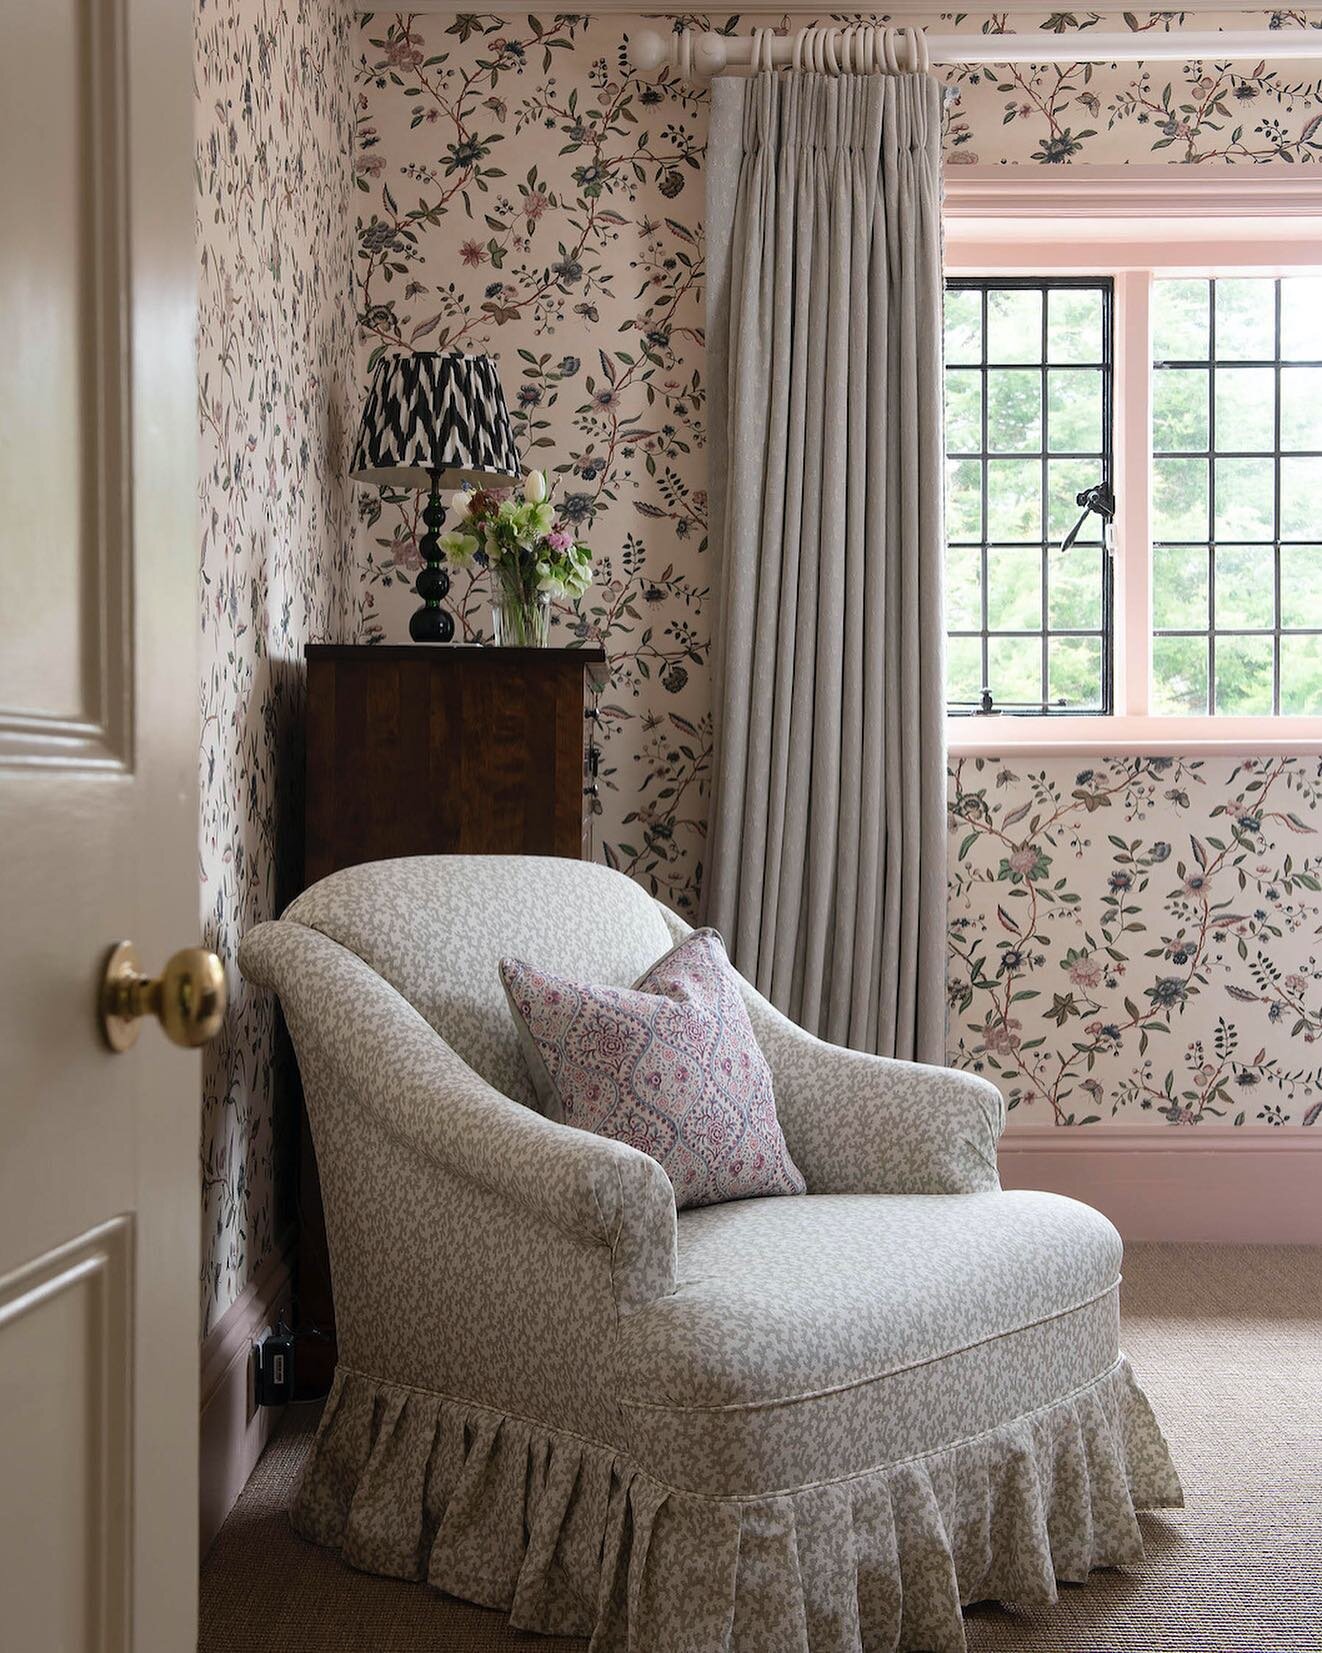 A pretty bedroom we designed in a country house project. Show stopping wallpaper by @hamiltonwestonwallpapersltd and lovely antique armchair recovered in @veere_grenney 'Folly' fabric with a pretty frill 🌱​​​​​​​​​​​​​​​​ ✨​​​​​​​​​​​​​​​​
​​​​​​​​​